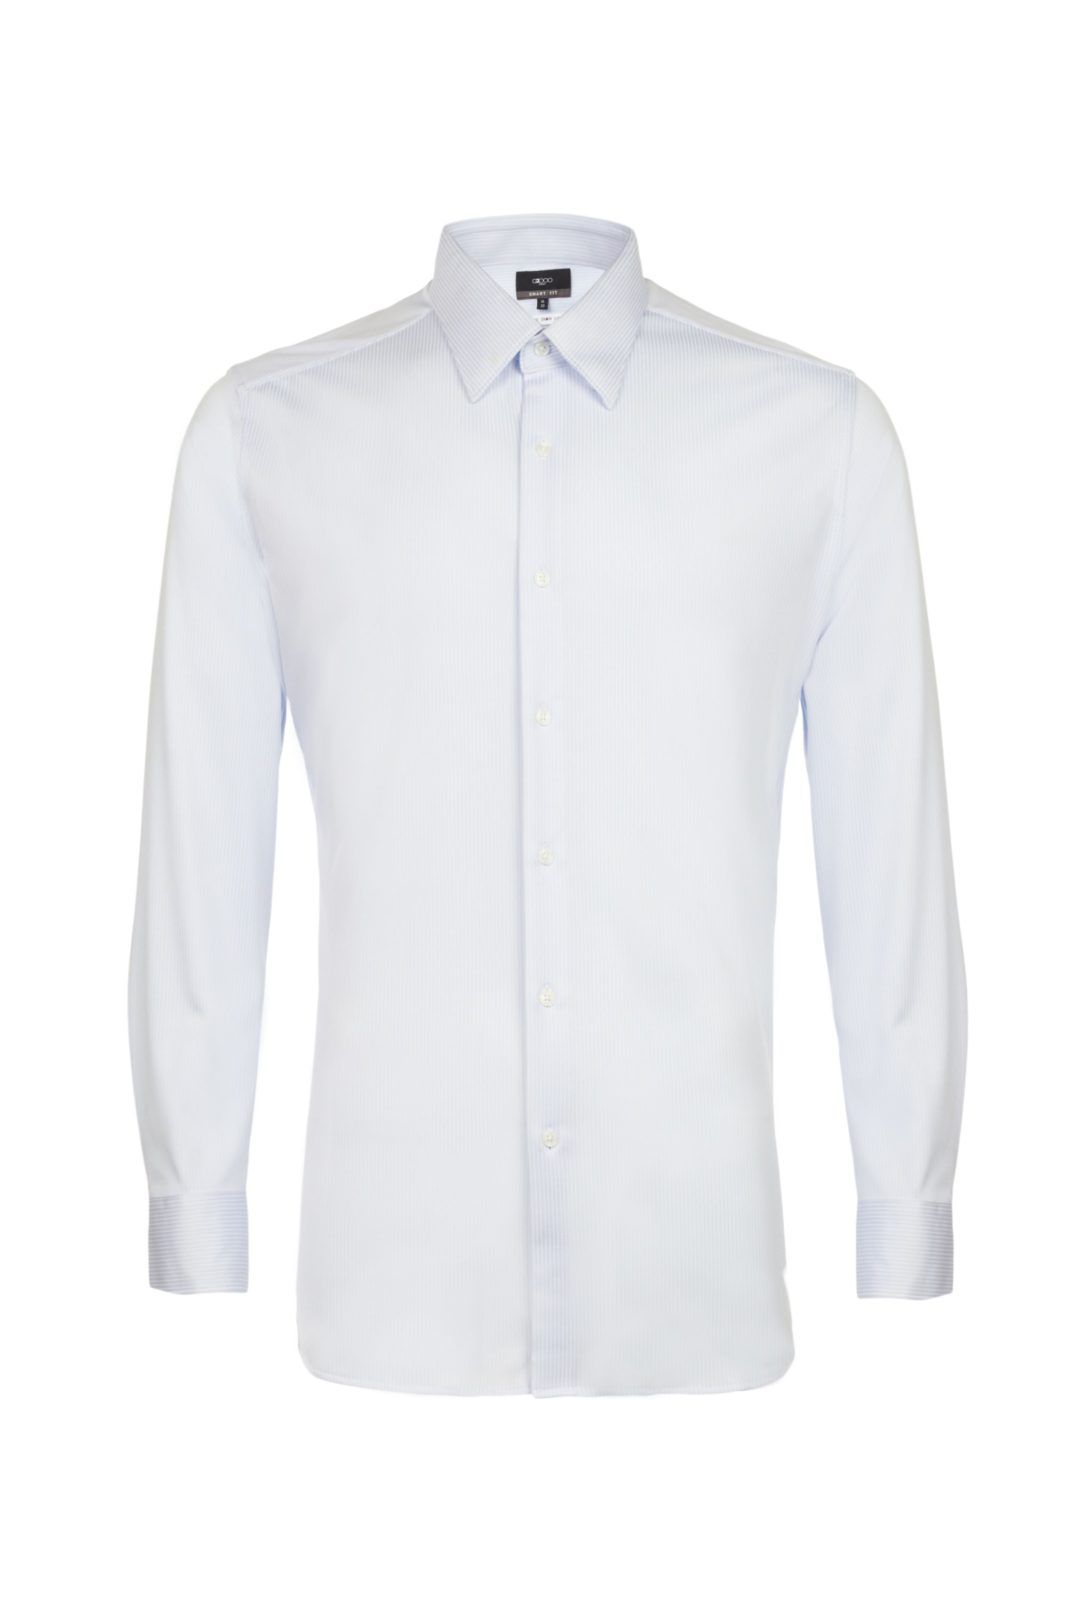 Upgrade your work wardrobe with G2000 high-tech dress shirts